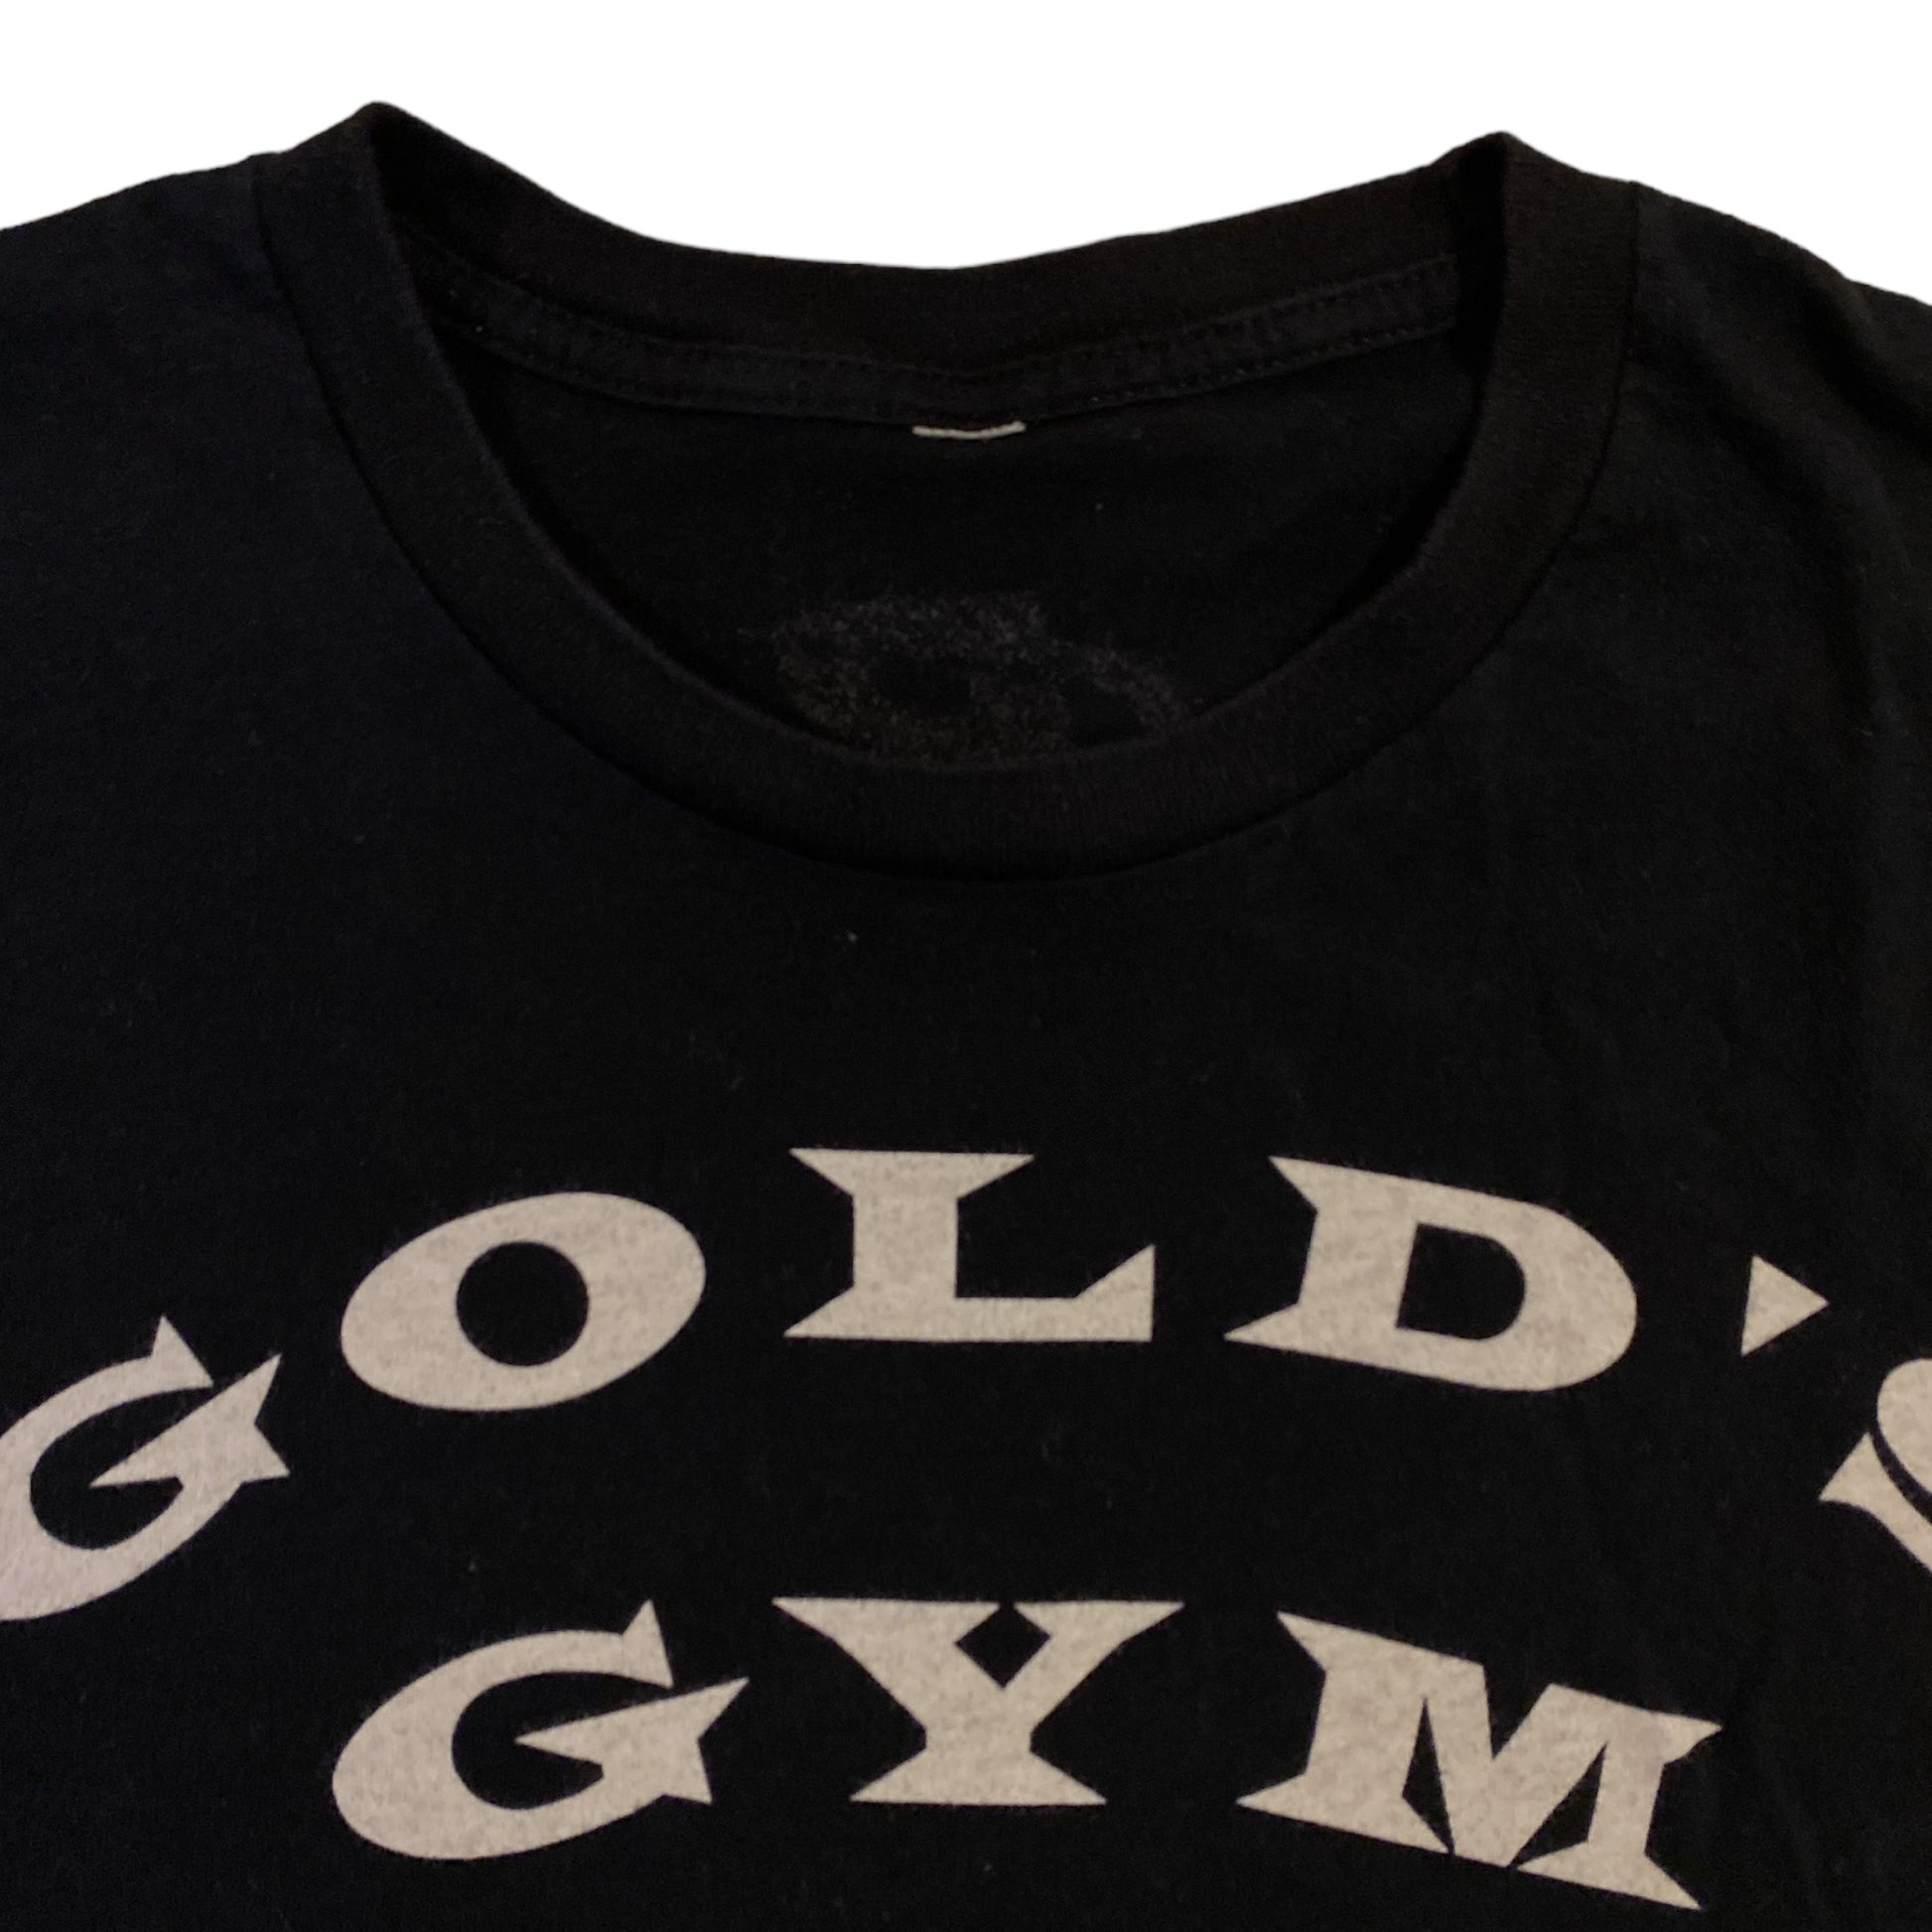 Bulldog Gym Venice California Muscle Bodybuilding Workout Exercise White /  Vintage Gold T-shirt Brand New Size S M L XL -  Canada